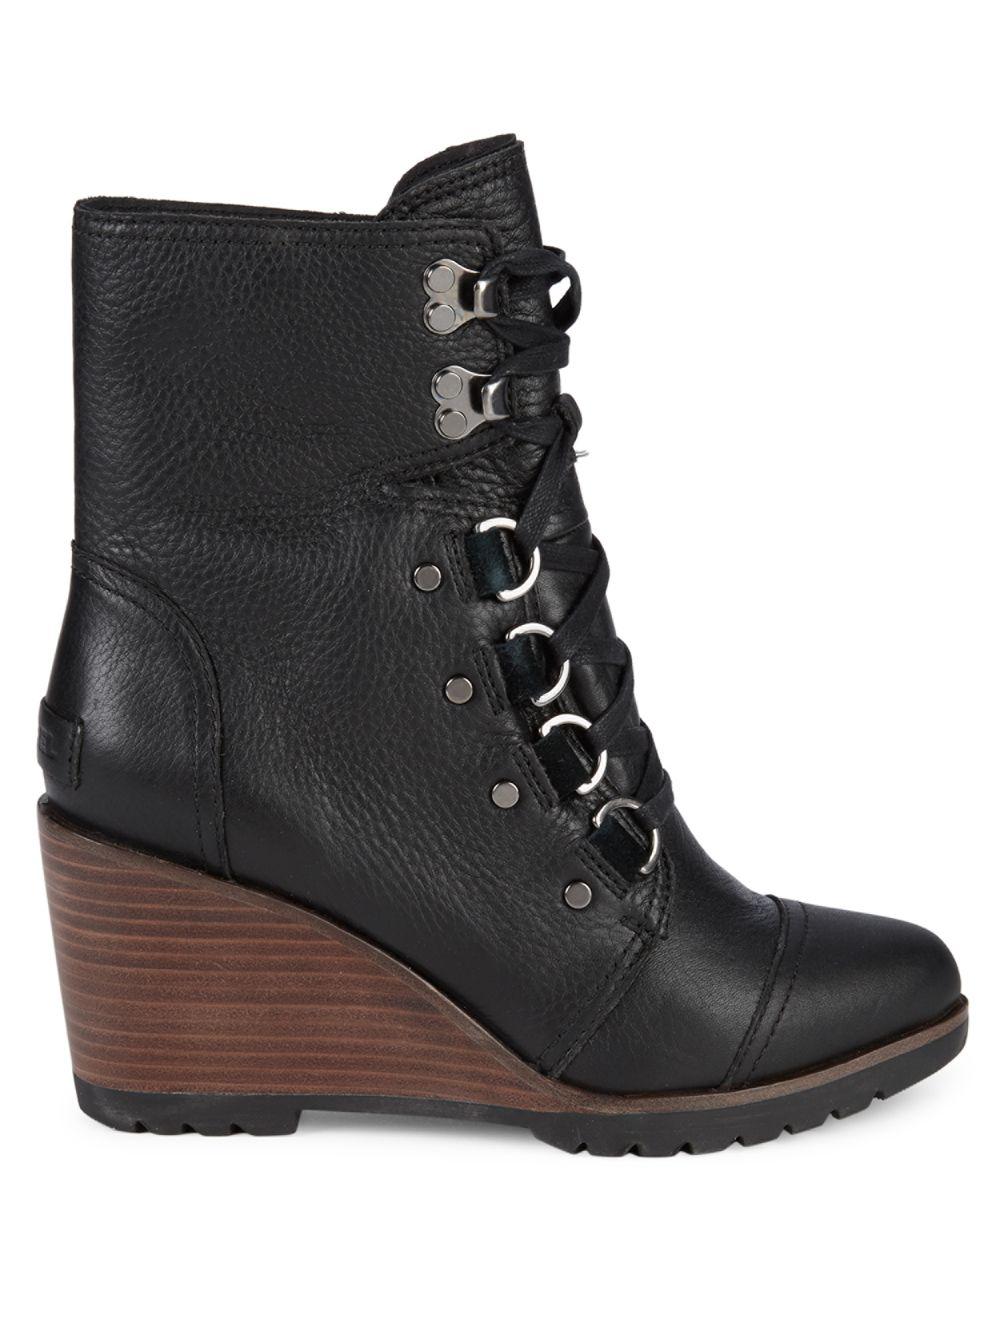 Sorel After Hours Pebbled Leather Stacked Wedge Ankle Boots in Black Lyst